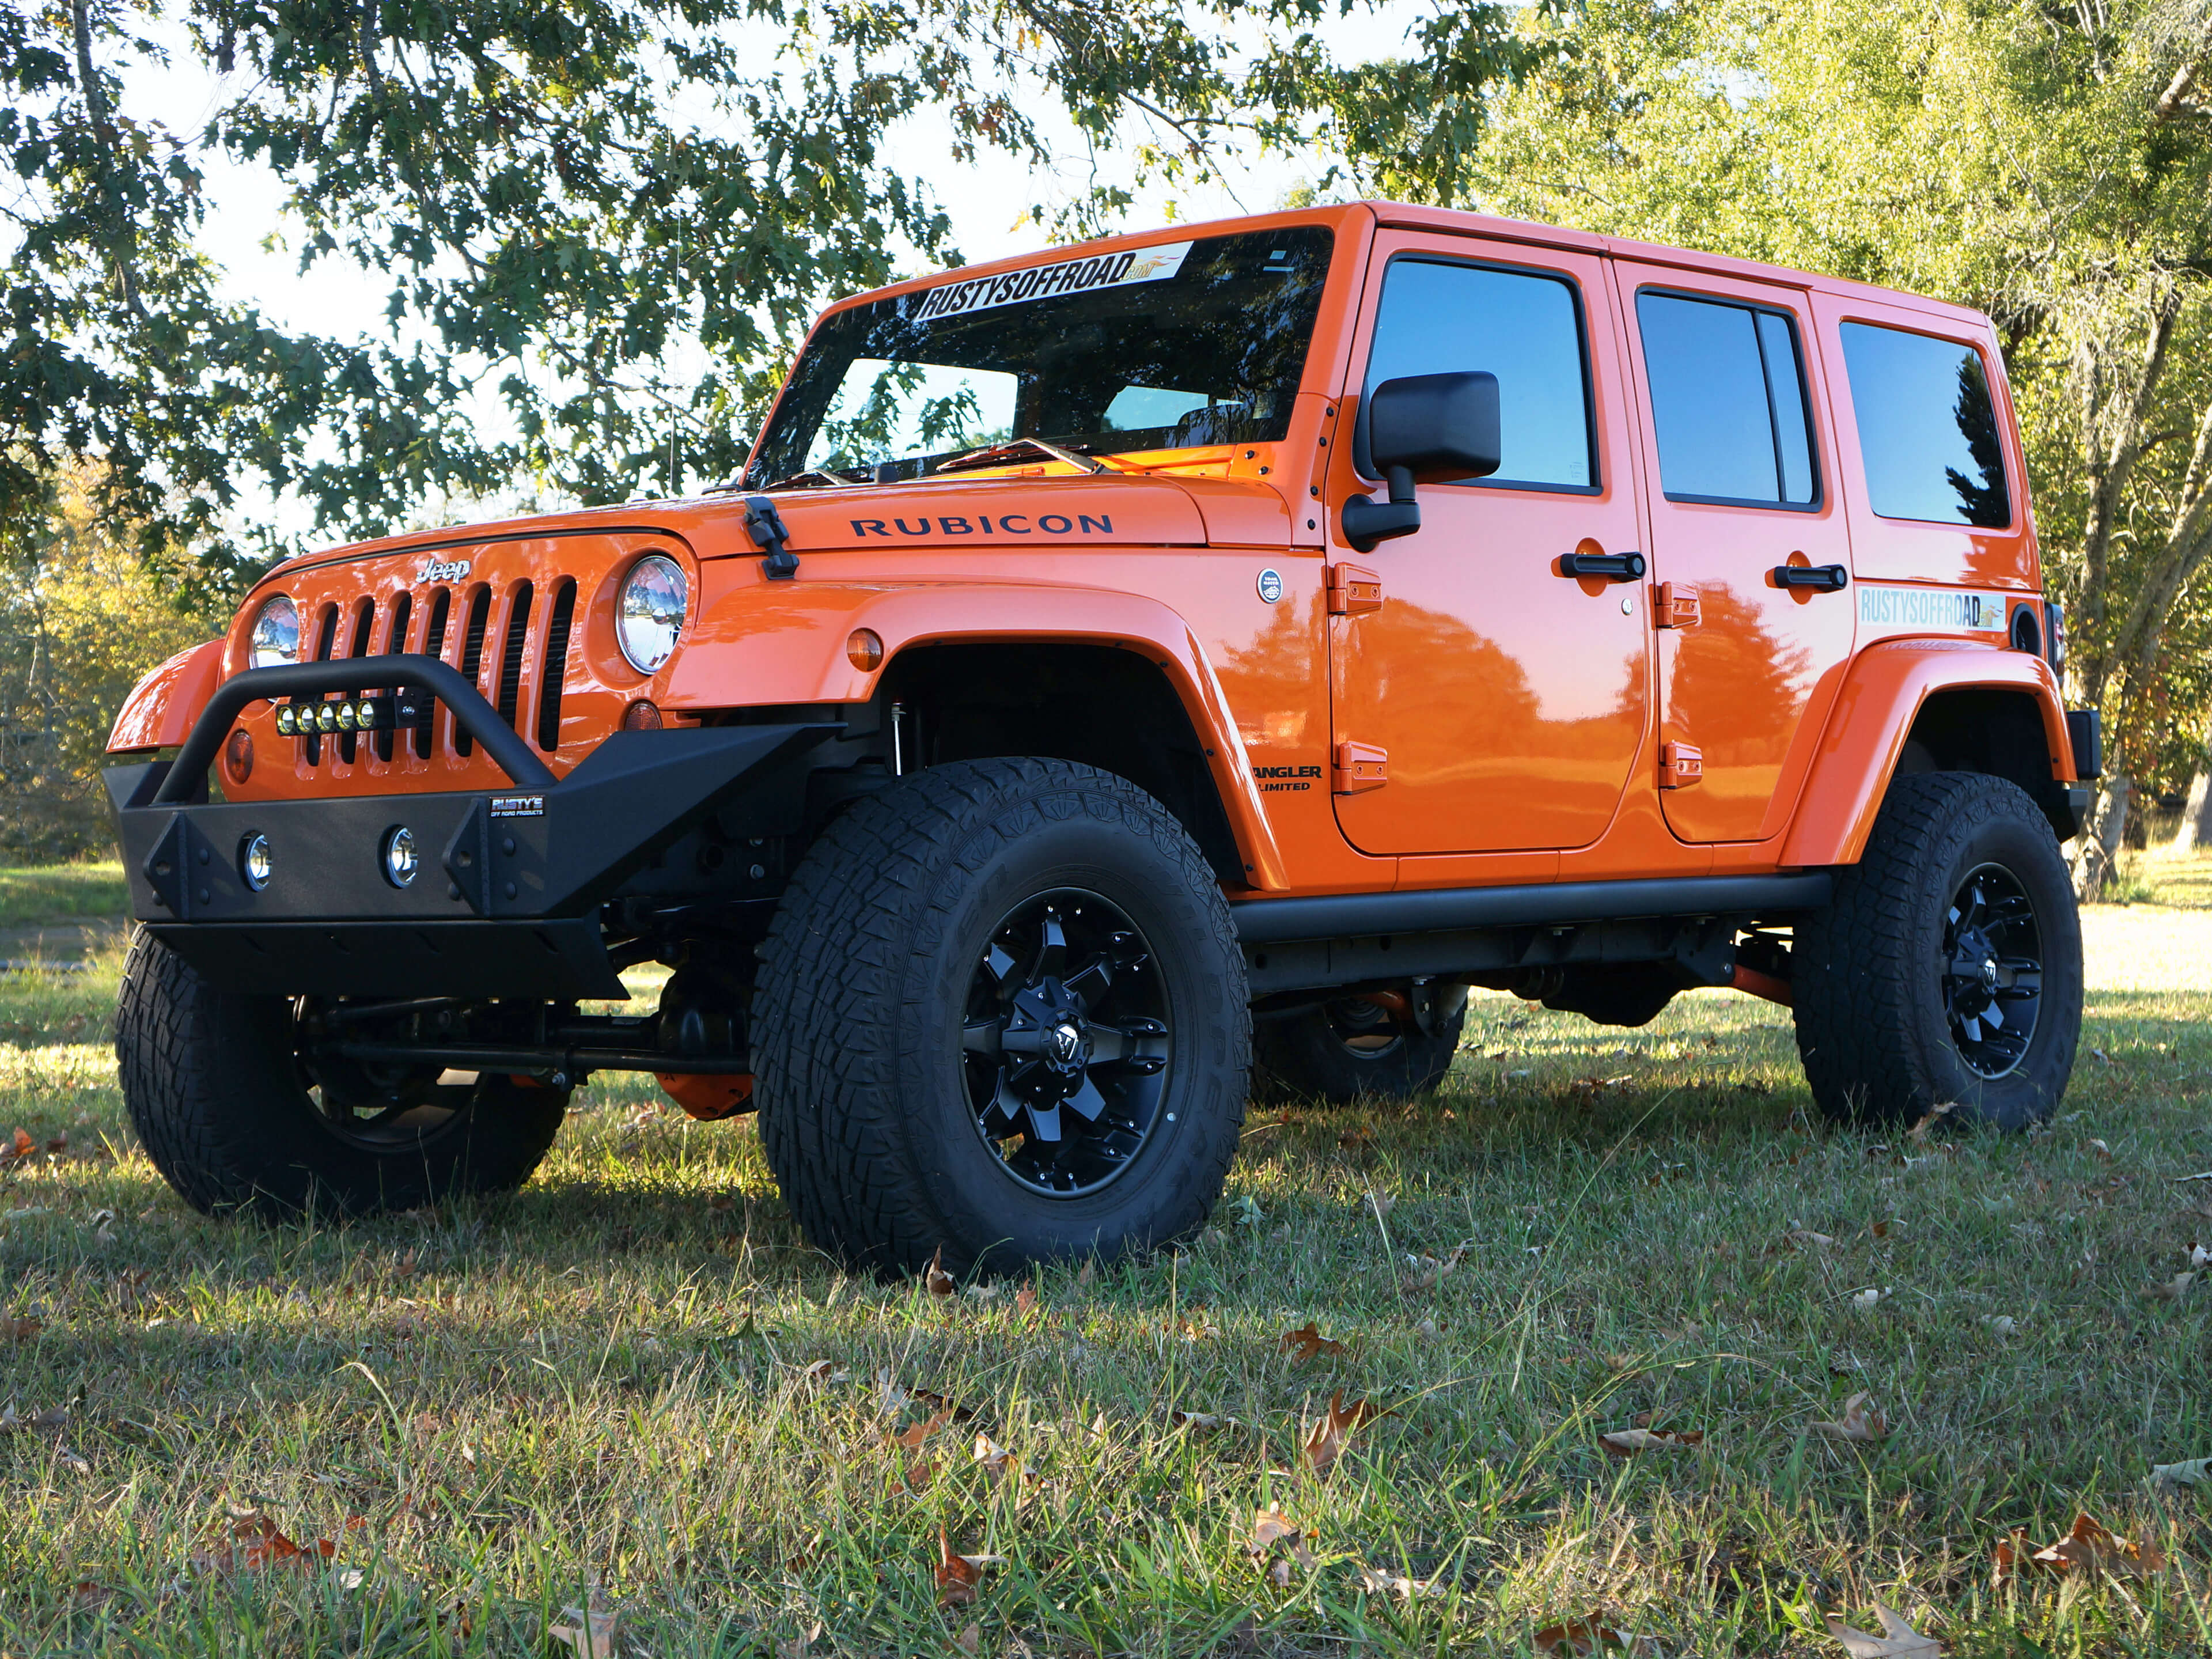 JK Wrangler & Rubicon ('07-'18) Suspension Systems – Rusty's Off-Road  Products